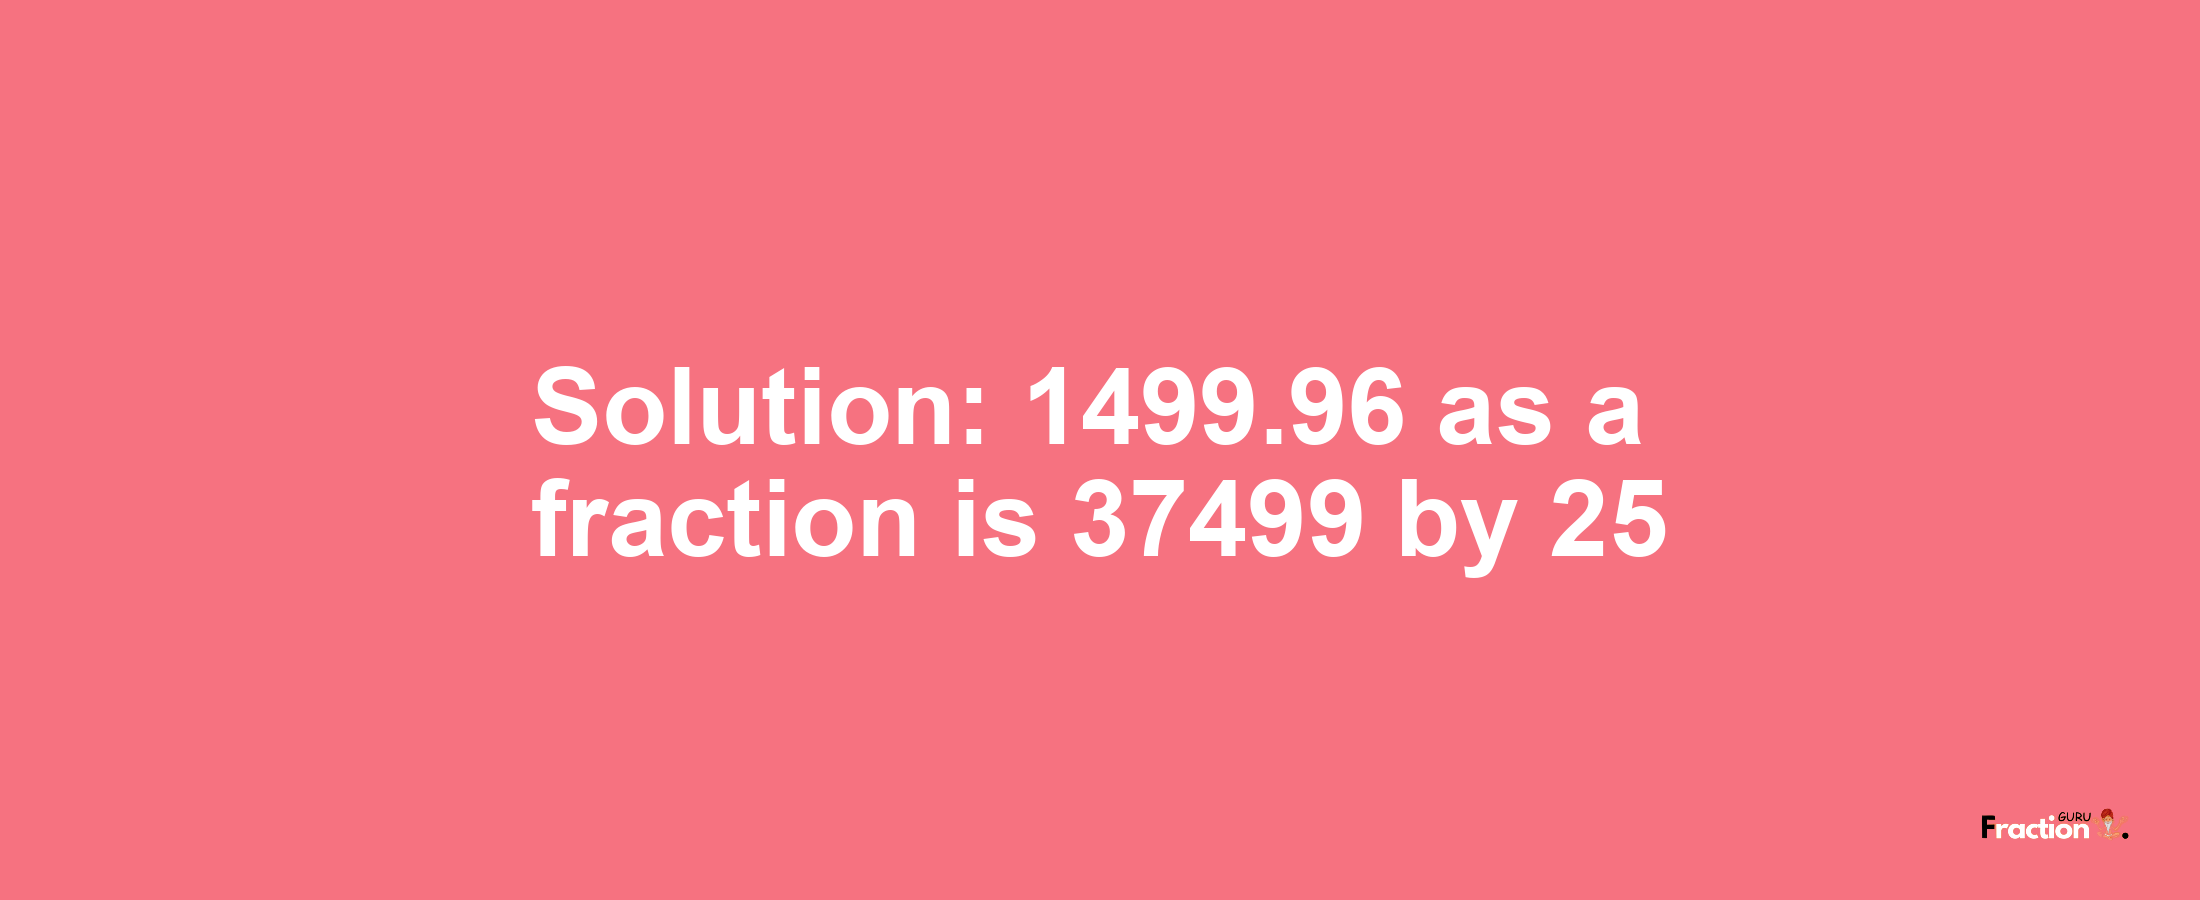 Solution:1499.96 as a fraction is 37499/25